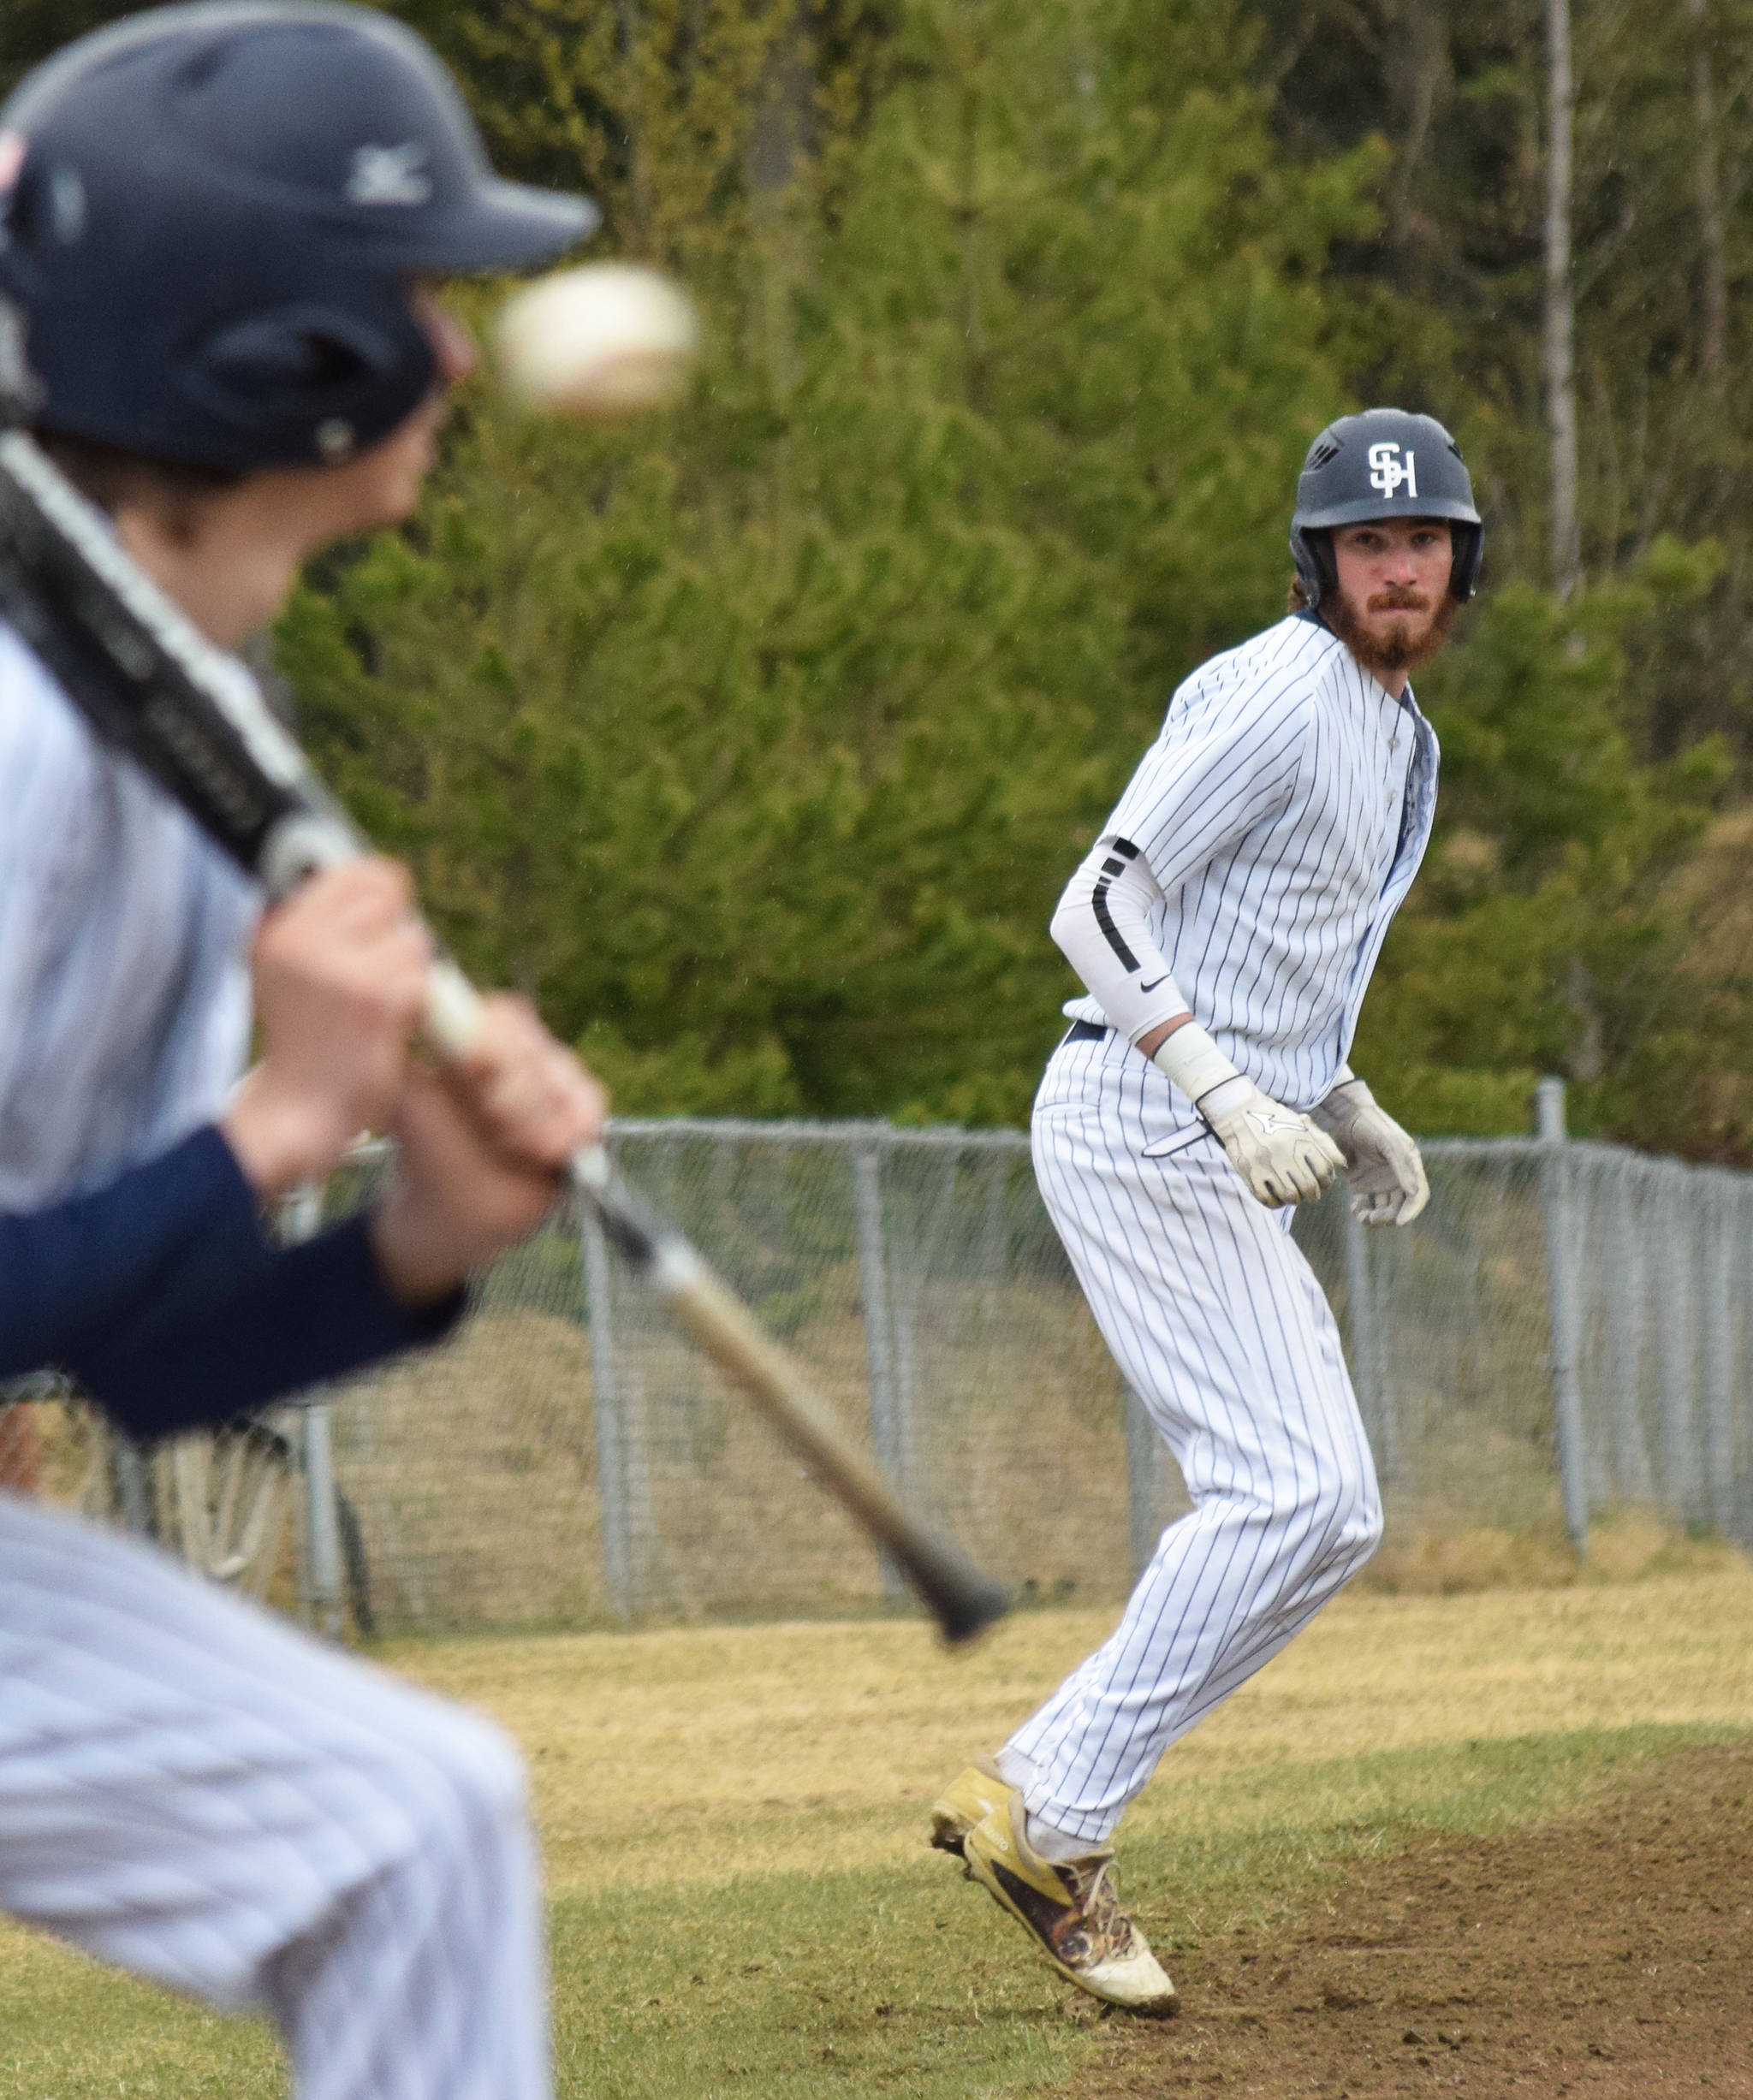 Soldotna’s David Michael keeps an eye on home plate Wednesday, May 15, 2019, against Homer at the Soldotna Little League Fields in Soldotna, Alaska. (Photo by Joey Klecka/Peninsula Clarion)